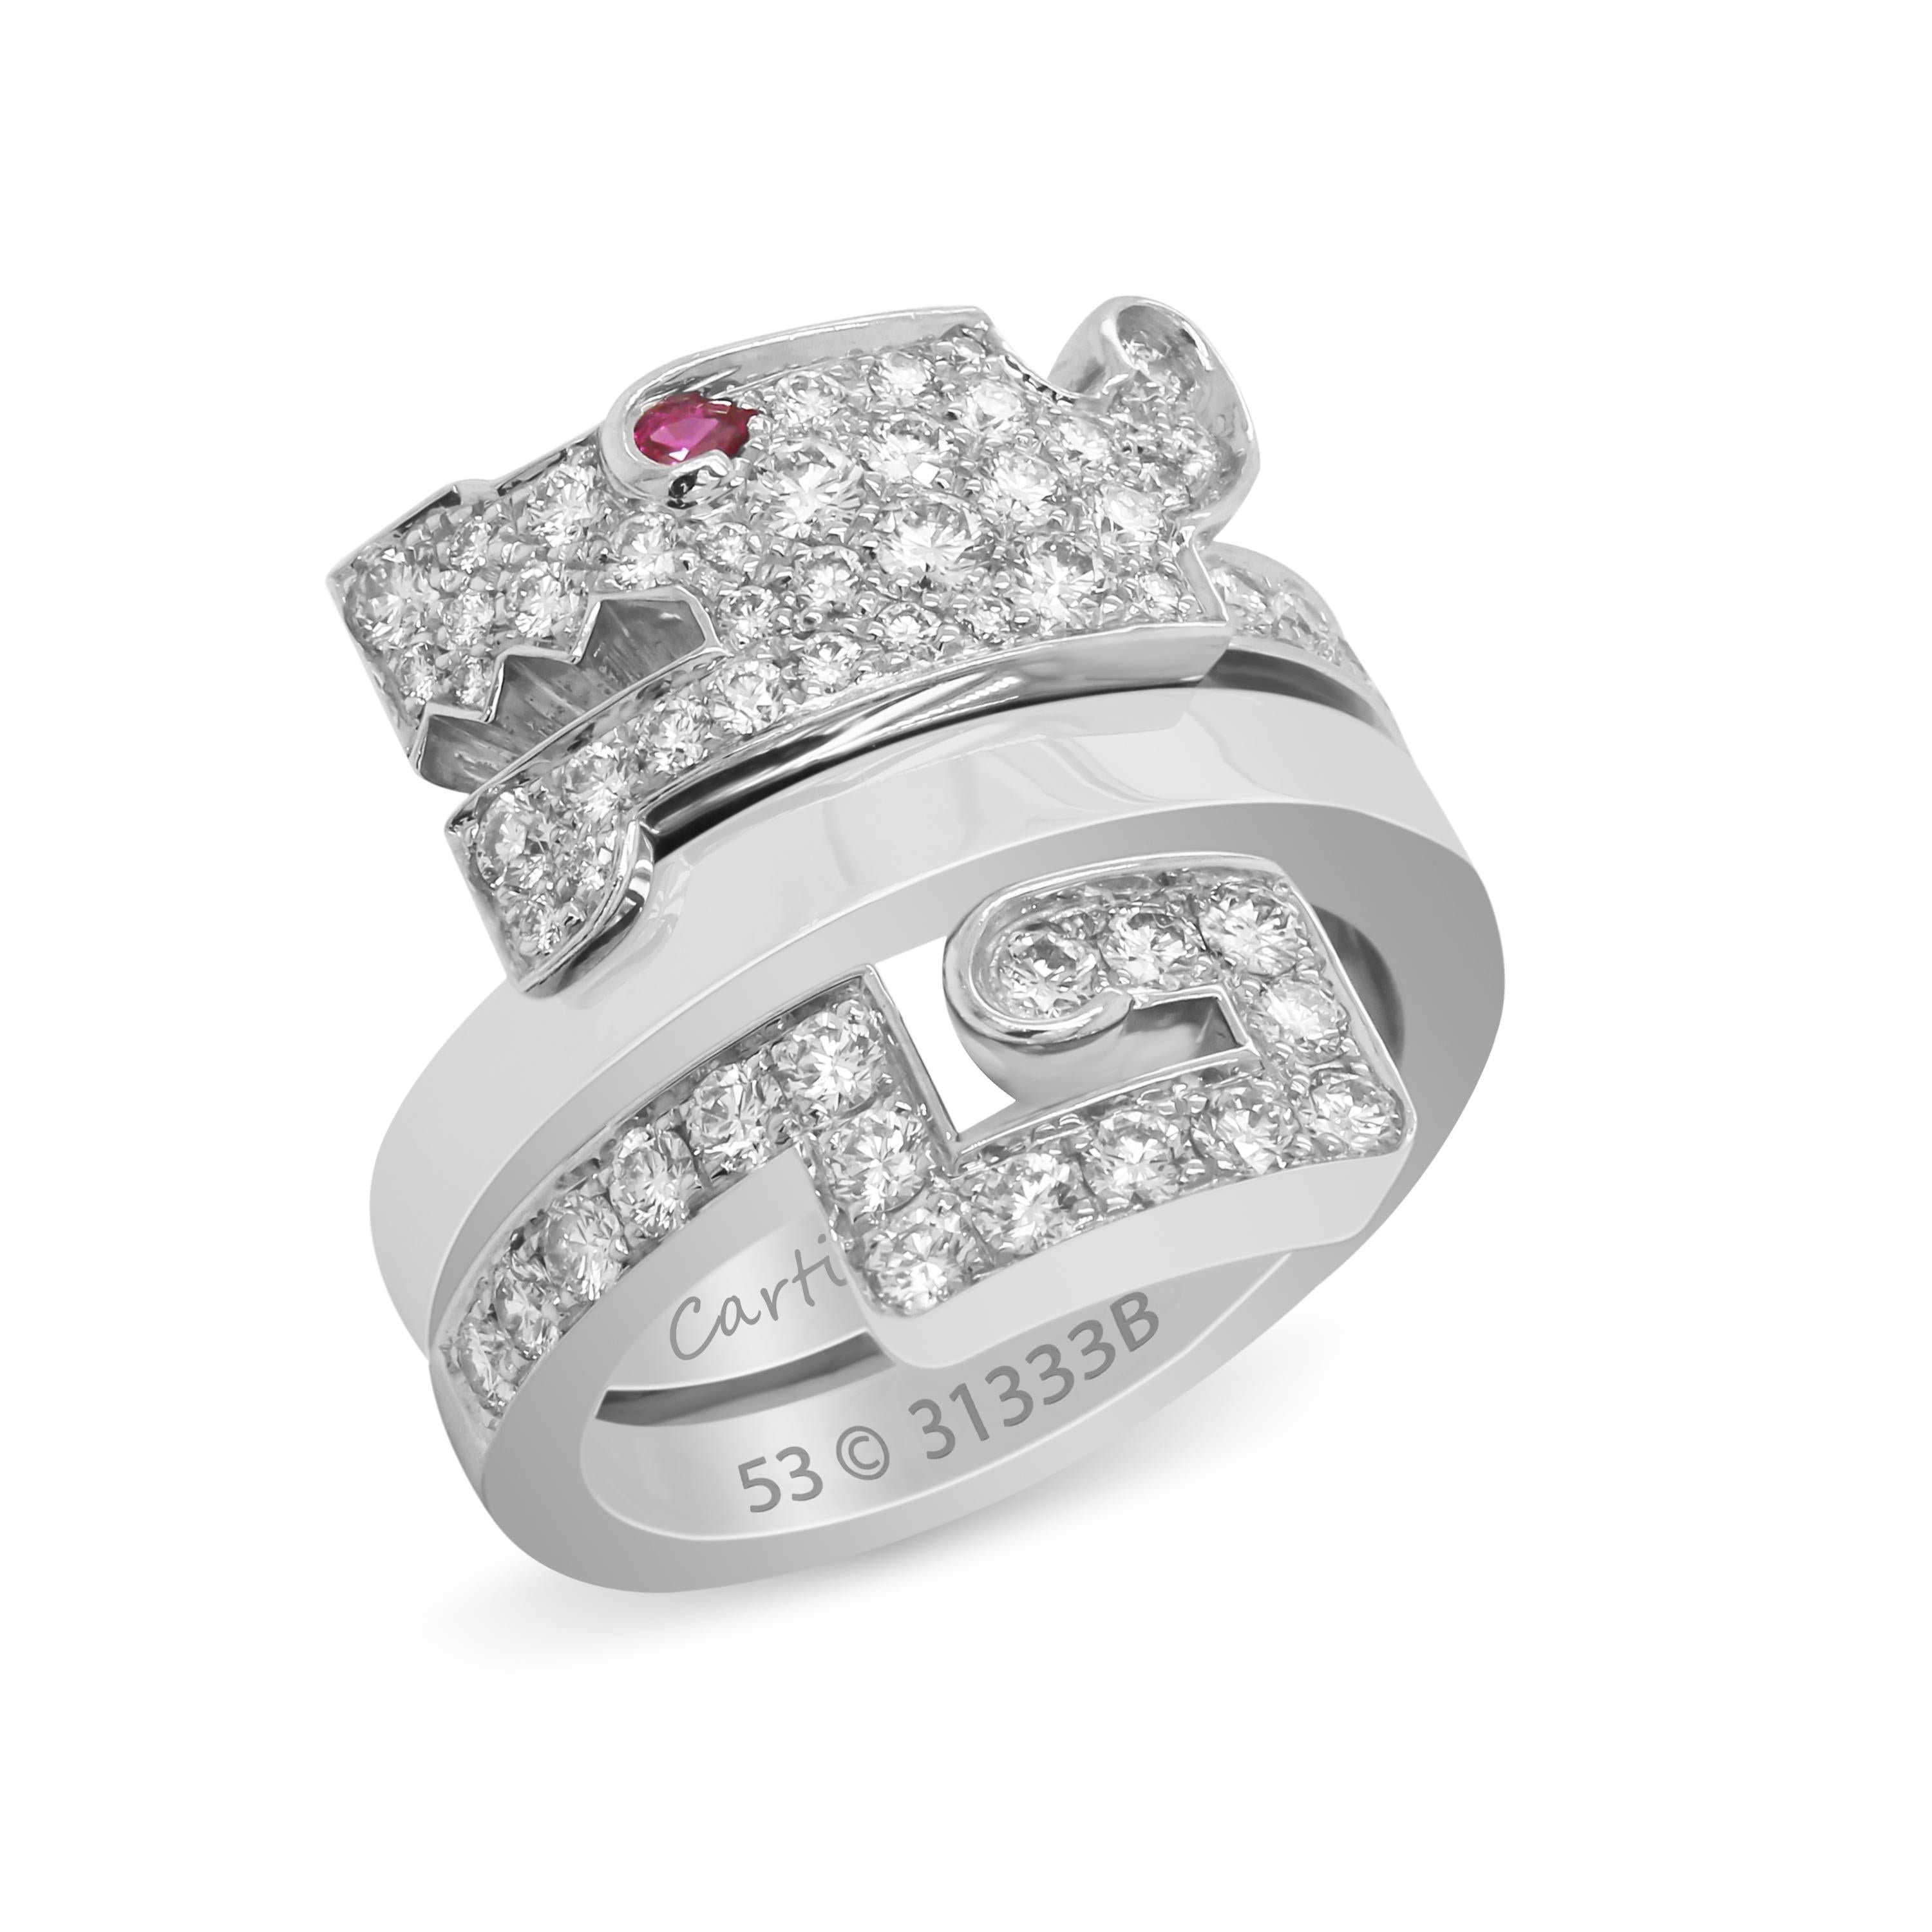 Cartier Baiser Du Dragon Diamond Ruby 18K White Gold Ring

This state of the art ring by Cartier is the 